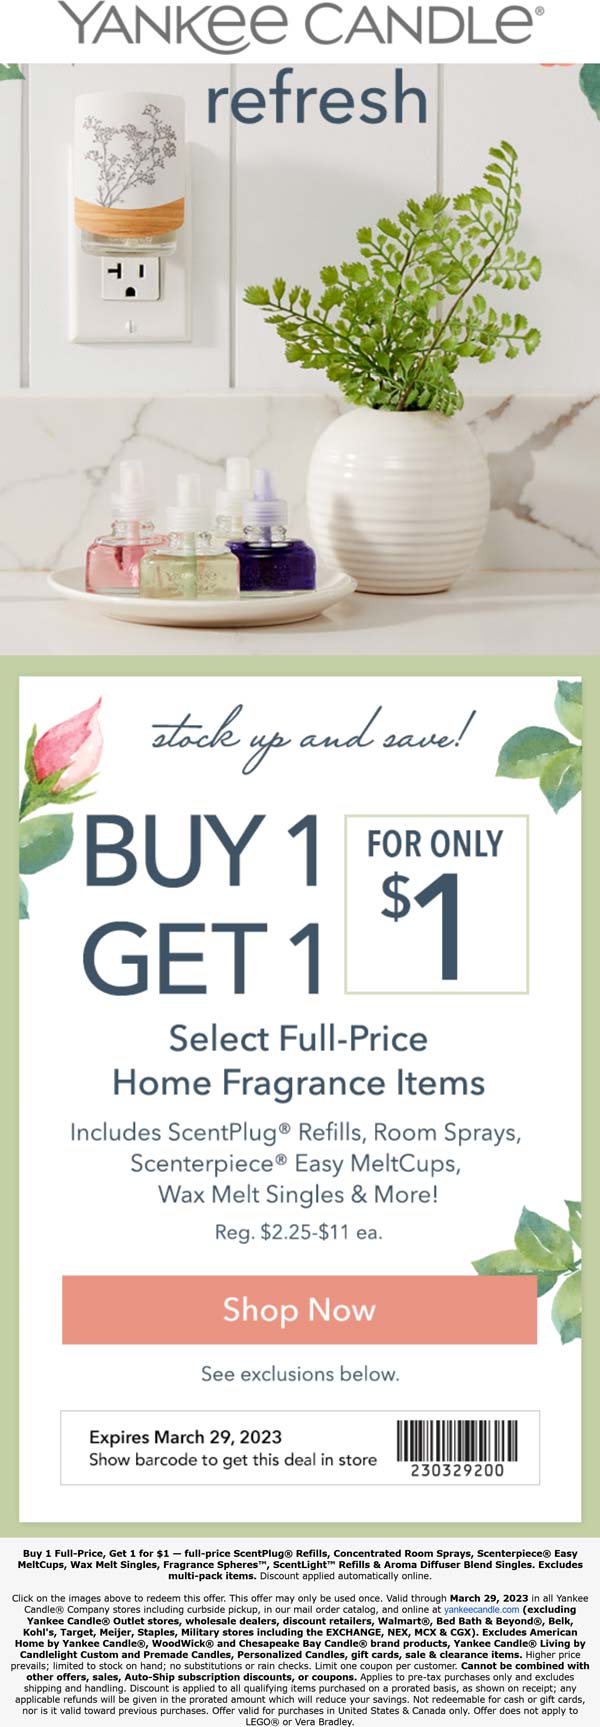 Yankee Candle stores Coupon  Second home fragrance for $1 at Yankee Candle #yankeecandle 